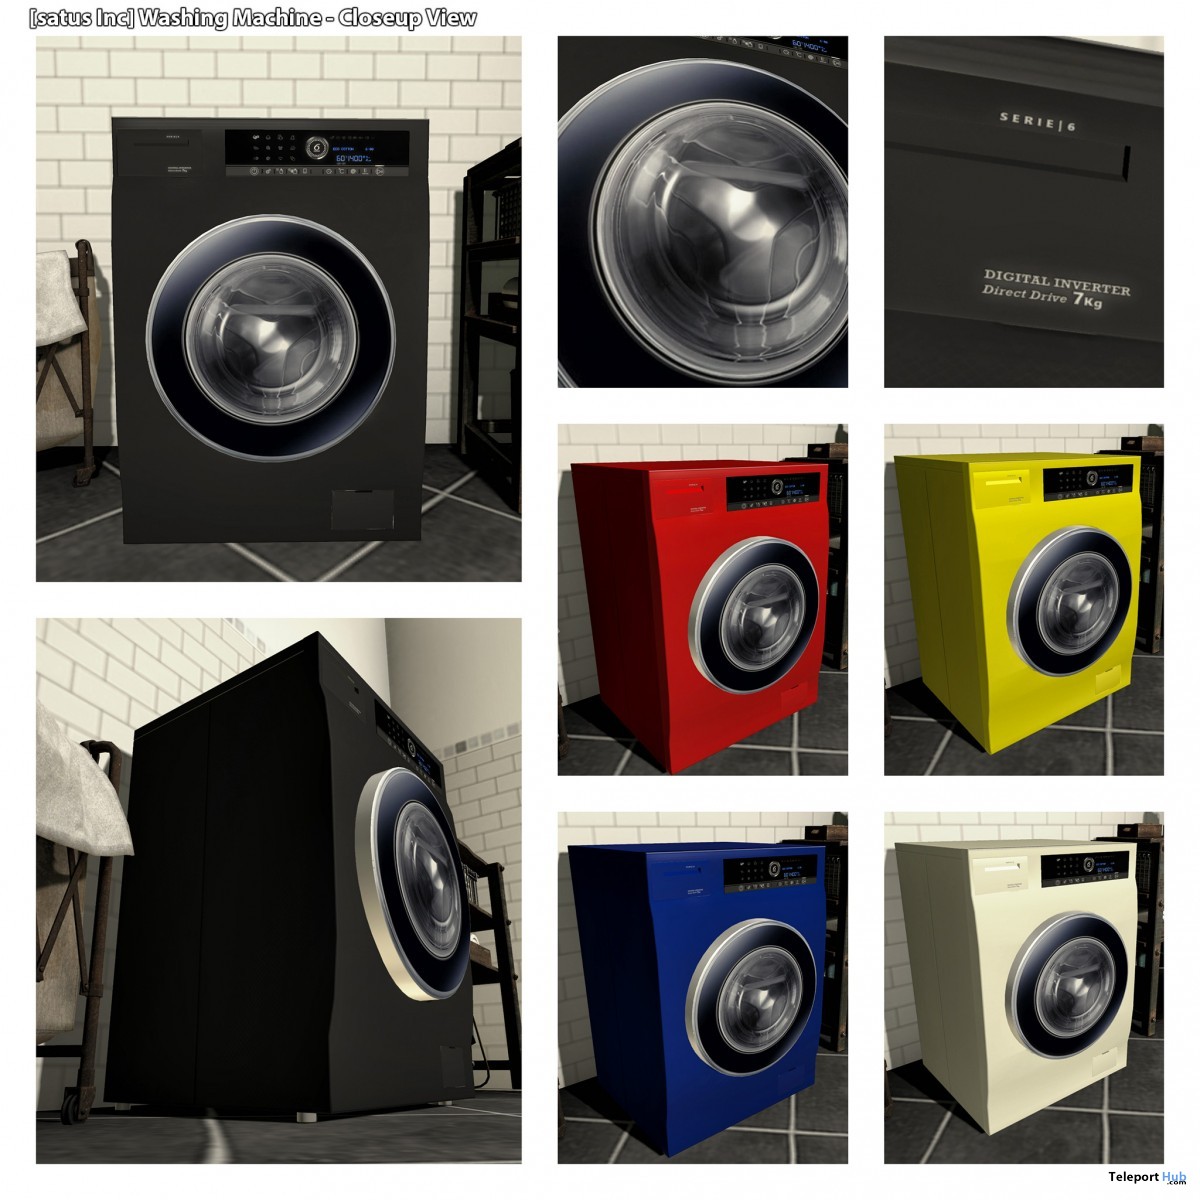 New Release: Washing Machine [PG] & [Adult] by [satus Inc] | Teleport ...